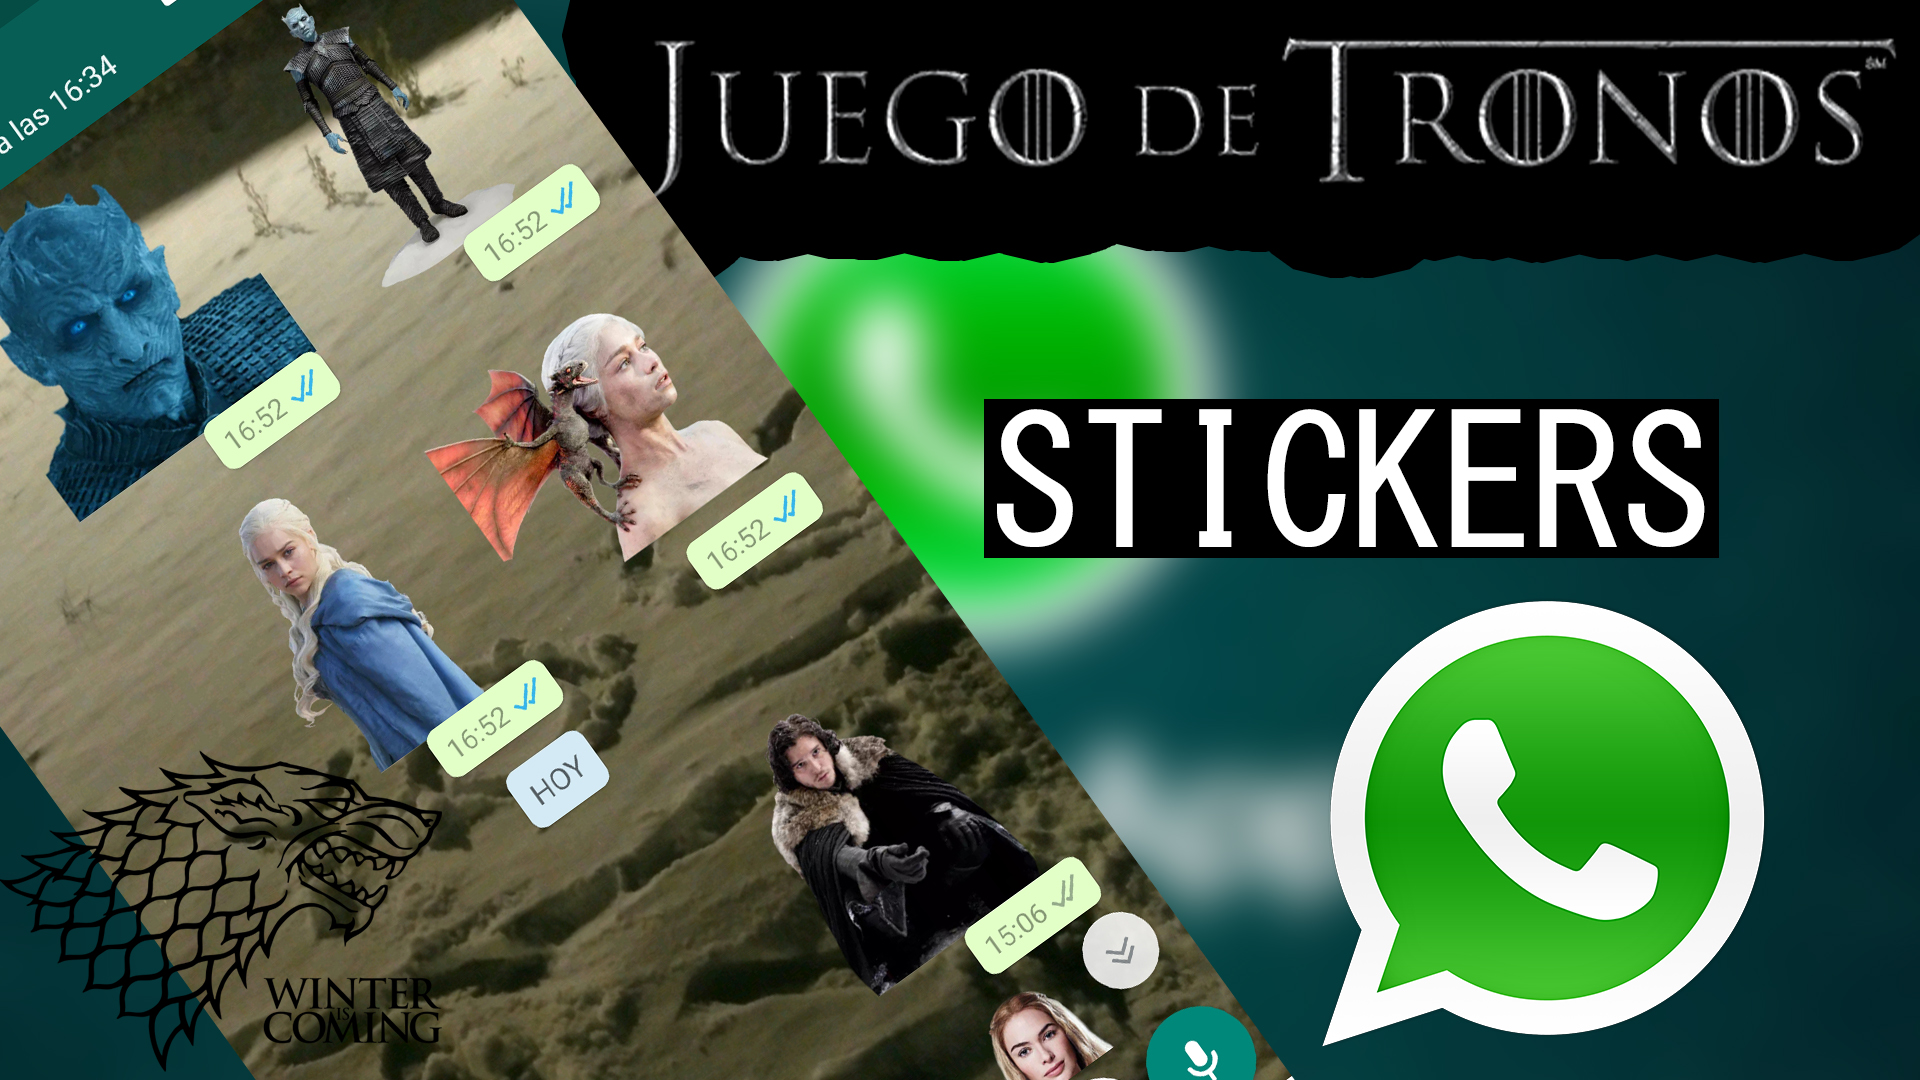 STICKERS GAME OF THRONES PARA WHATSAPP